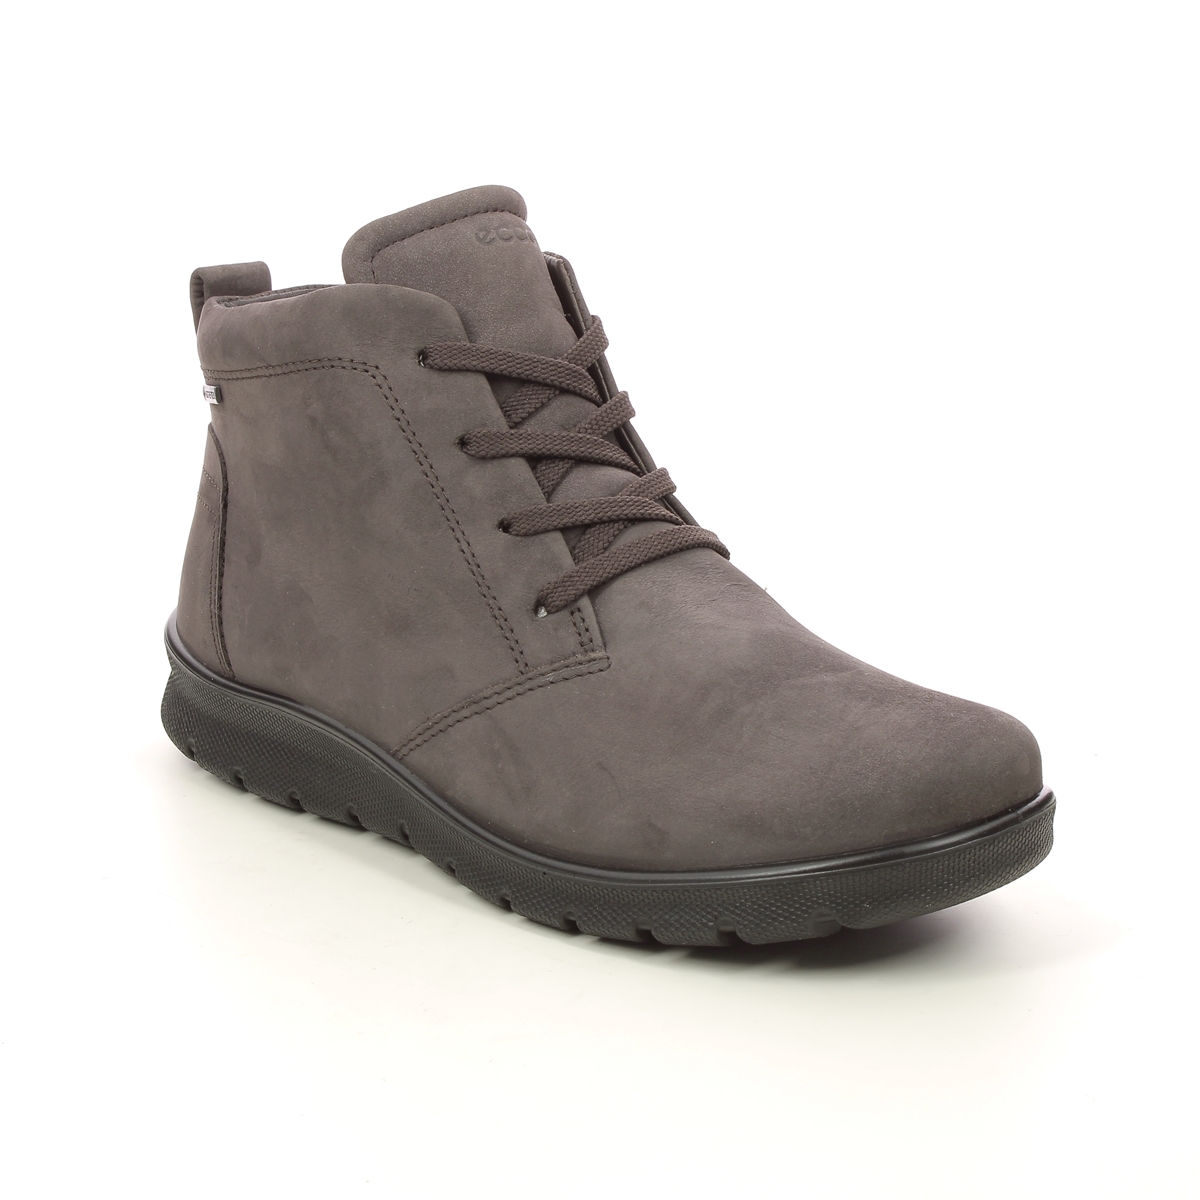 Ecco Babett Lo Gtx Brown Nubuck Womens Lace Up Boots 215583-02576 In Size 38 In Plain Brown Nubuck